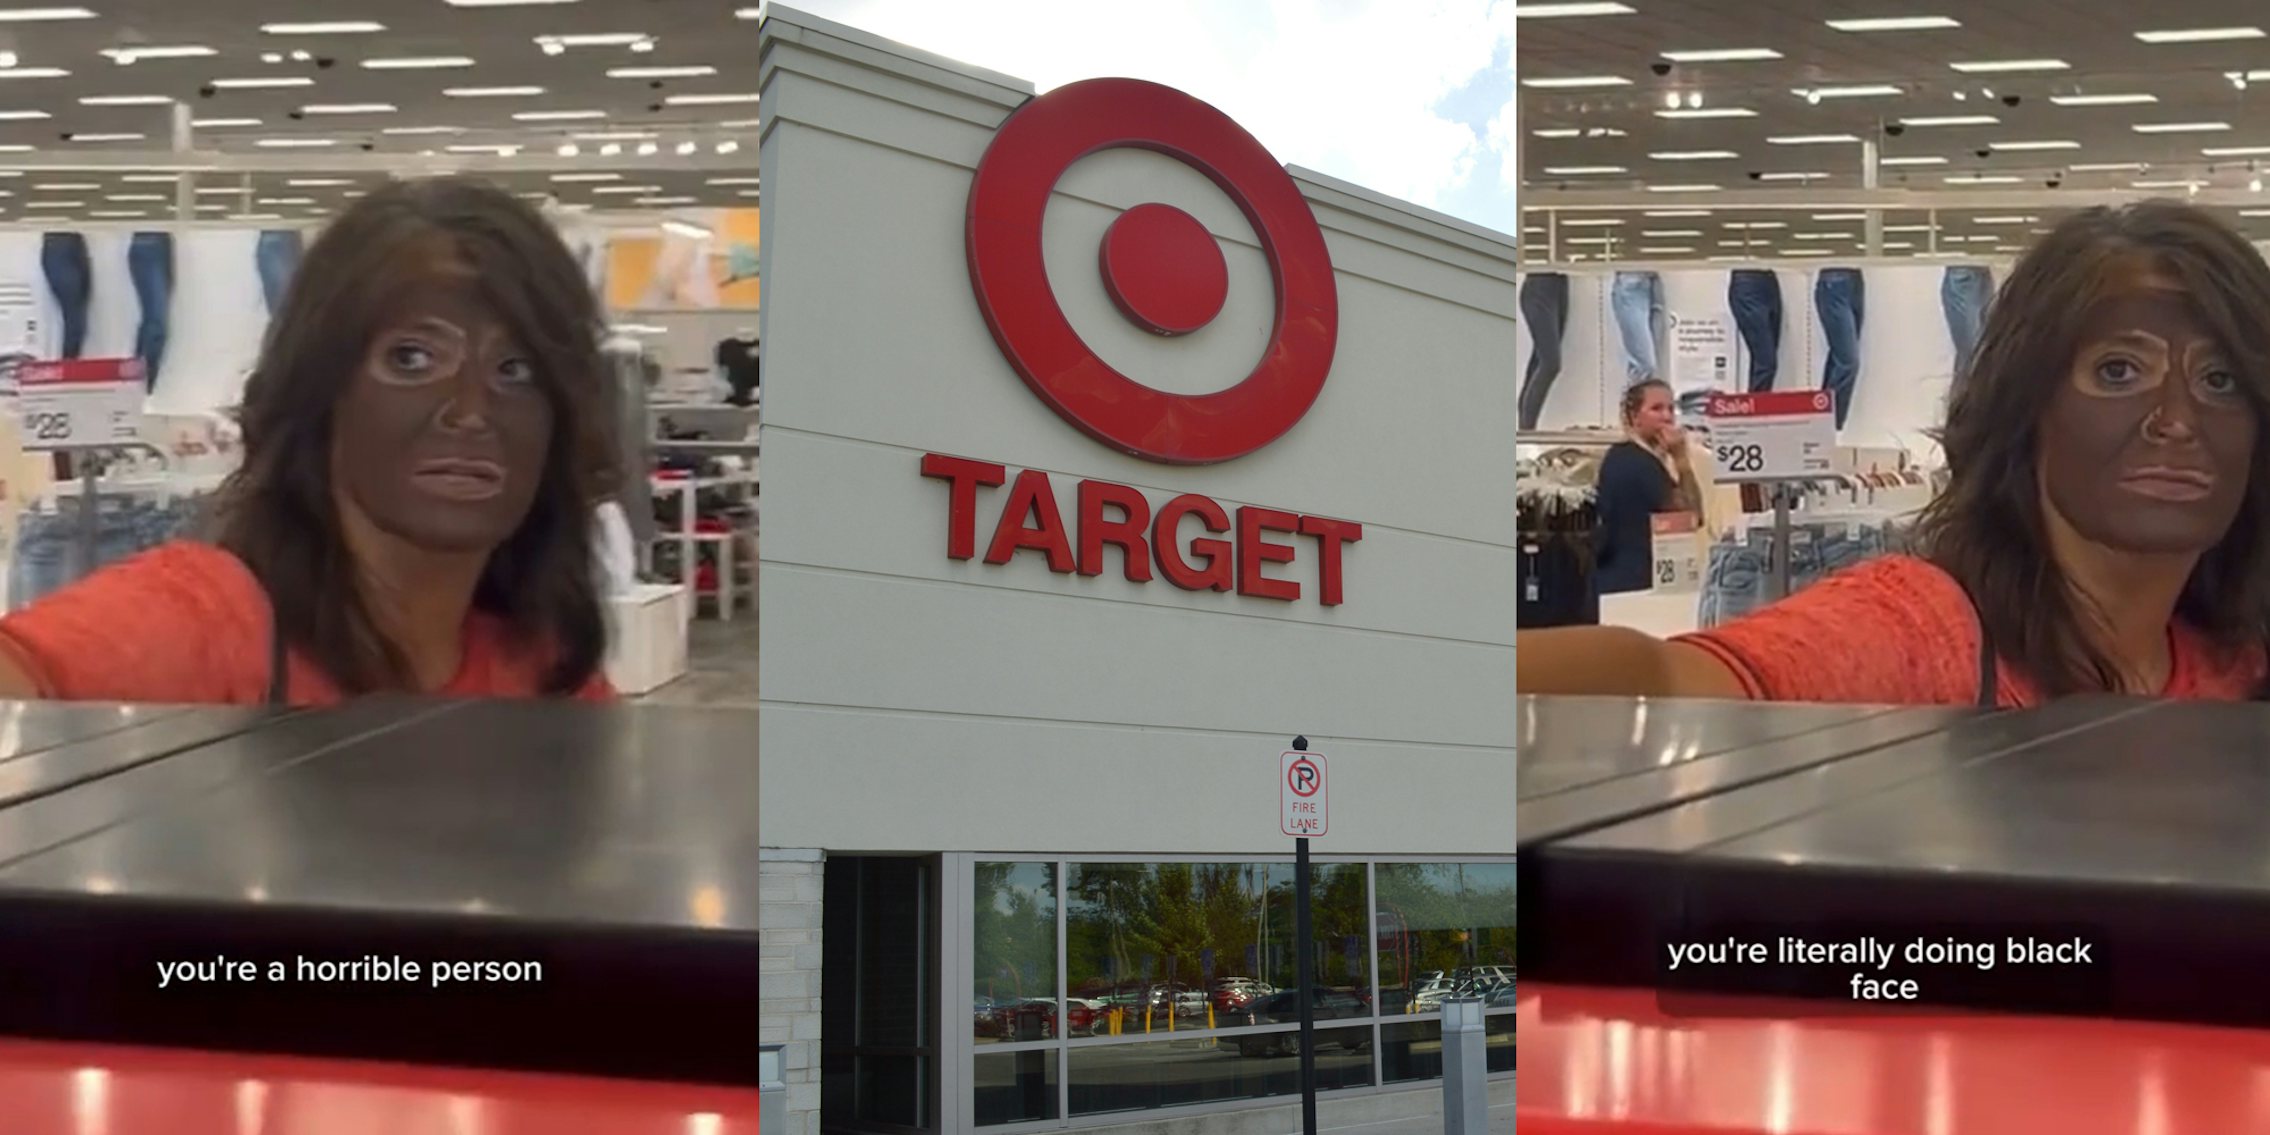 woman in blackface at Target with caption 'you're a horrible person' (l) Target building with sign (c) woman in blackface at Target with caption 'you're literally doing black face' (r)